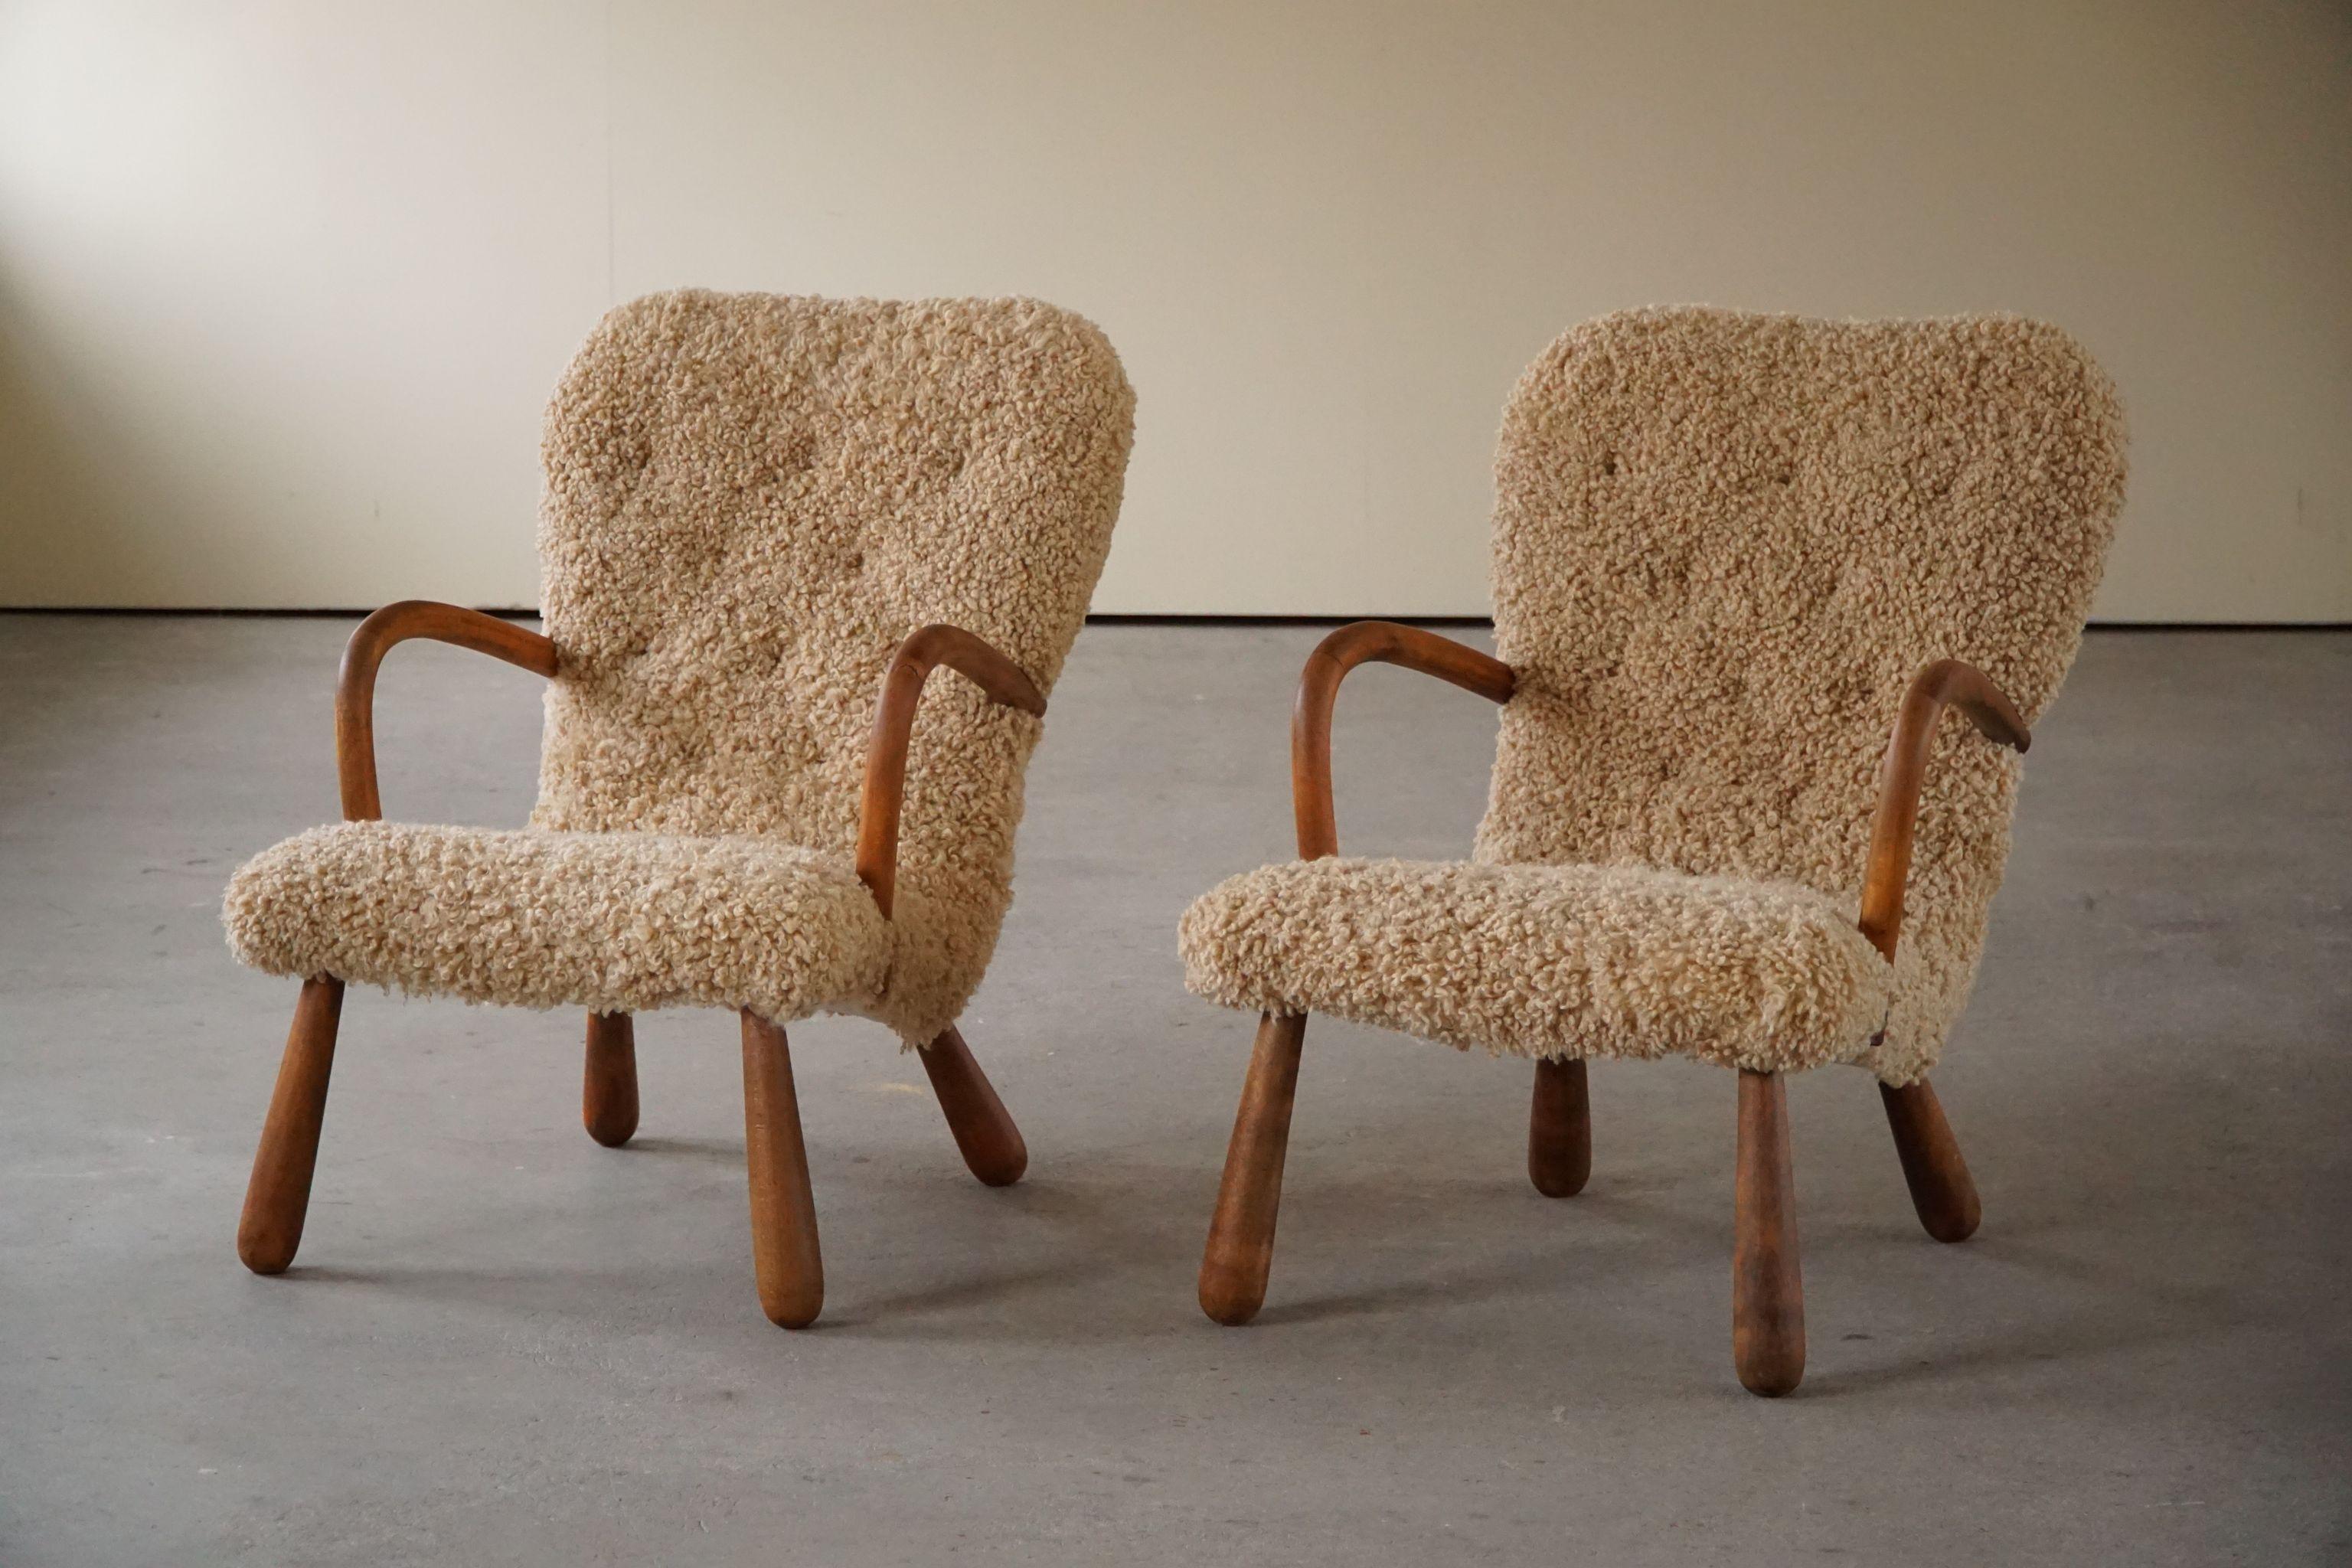 Pair of Clam Lounge Chairs in Lambswool, Skive Møbelfabrik, Denmark, 1950s For Sale 12